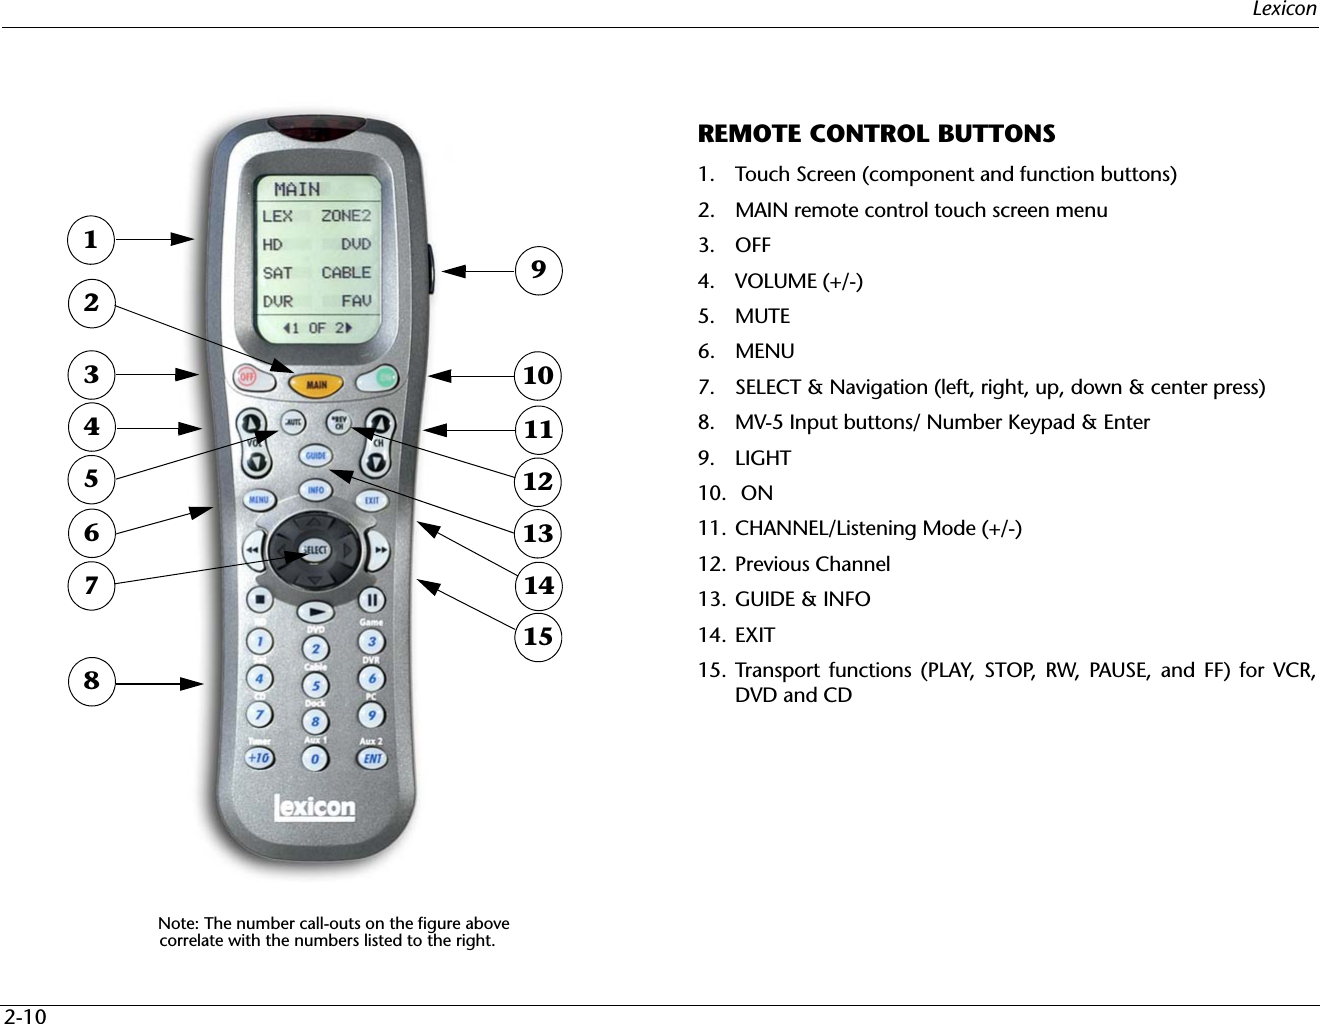 Lexicon2-10REMOTE CONTROL BUTTONS1. Touch Screen (component and function buttons)2. MAIN remote control touch screen menu3. OFF4. VOLUME (+/-)5. MUTE6. MENU7. SELECT &amp; Navigation (left, right, up, down &amp; center press)8. MV-5 Input buttons/ Number Keypad &amp; Enter 9. LIGHT10.  ON11. CHANNEL/Listening Mode (+/-)12. Previous Channel13. GUIDE &amp; INFO 14. EXIT15. Transport functions (PLAY, STOP, RW, PAUSE, and FF) for VCR,DVD and CDNote: The number call-outs on the figure abovecorrelate with the numbers listed to the right. 1 9 2 3 10 4 11 5 12 6 71314 815